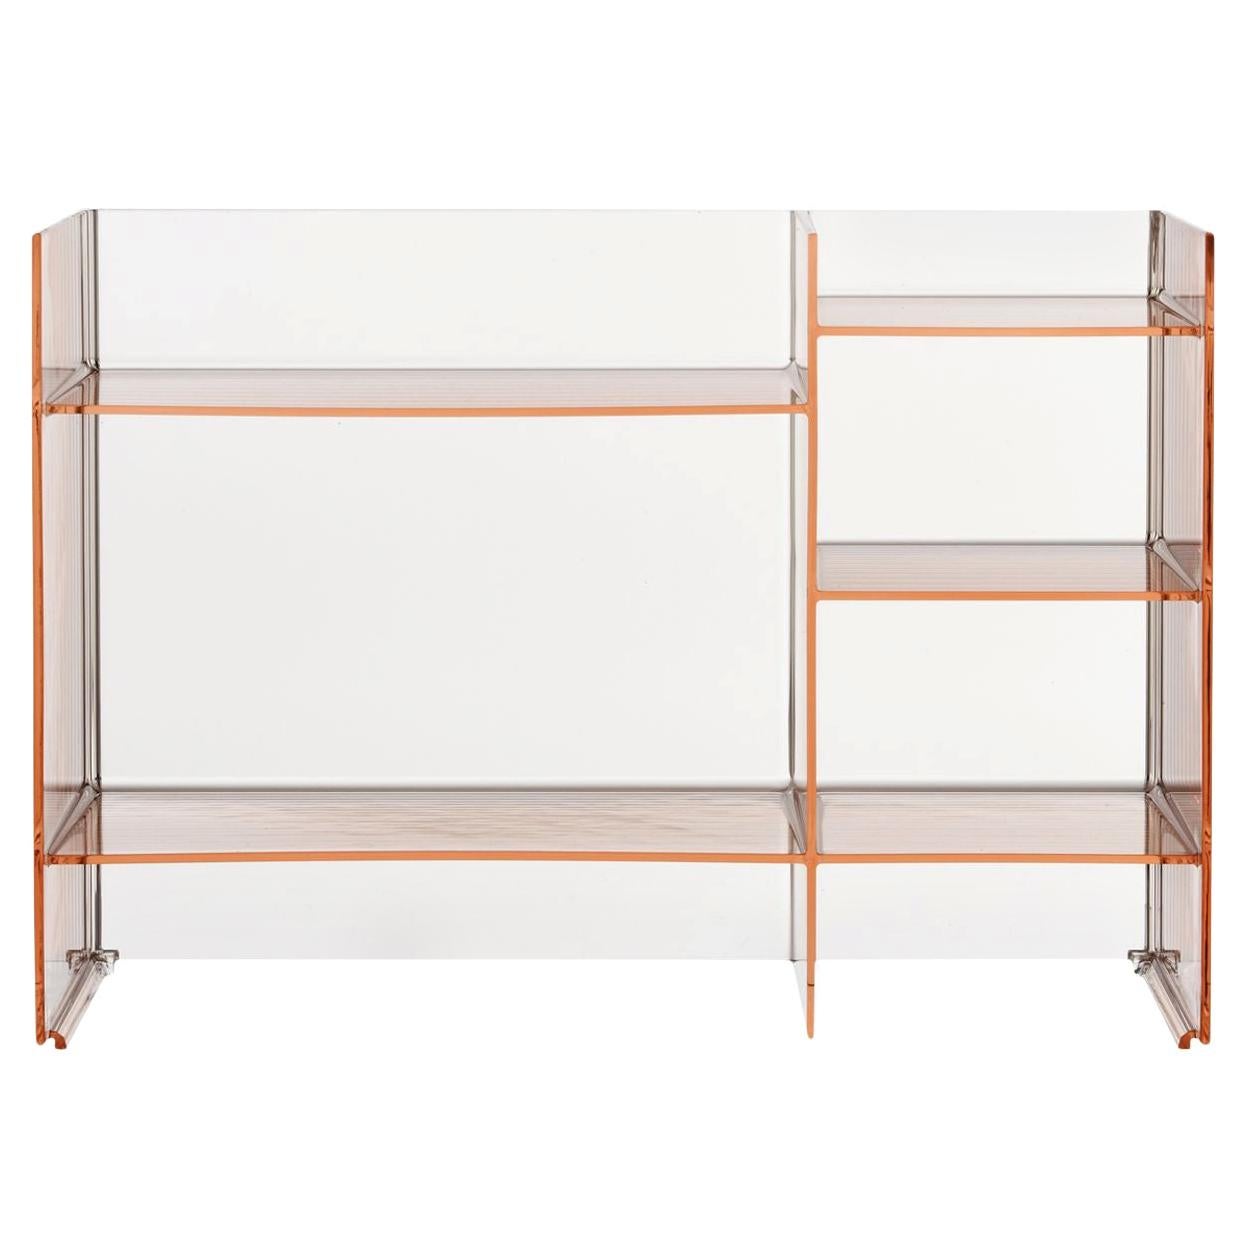 Kartell Sound Rack Modular Bookcase in Nude by Ludovica and Roberto Palomba For Sale